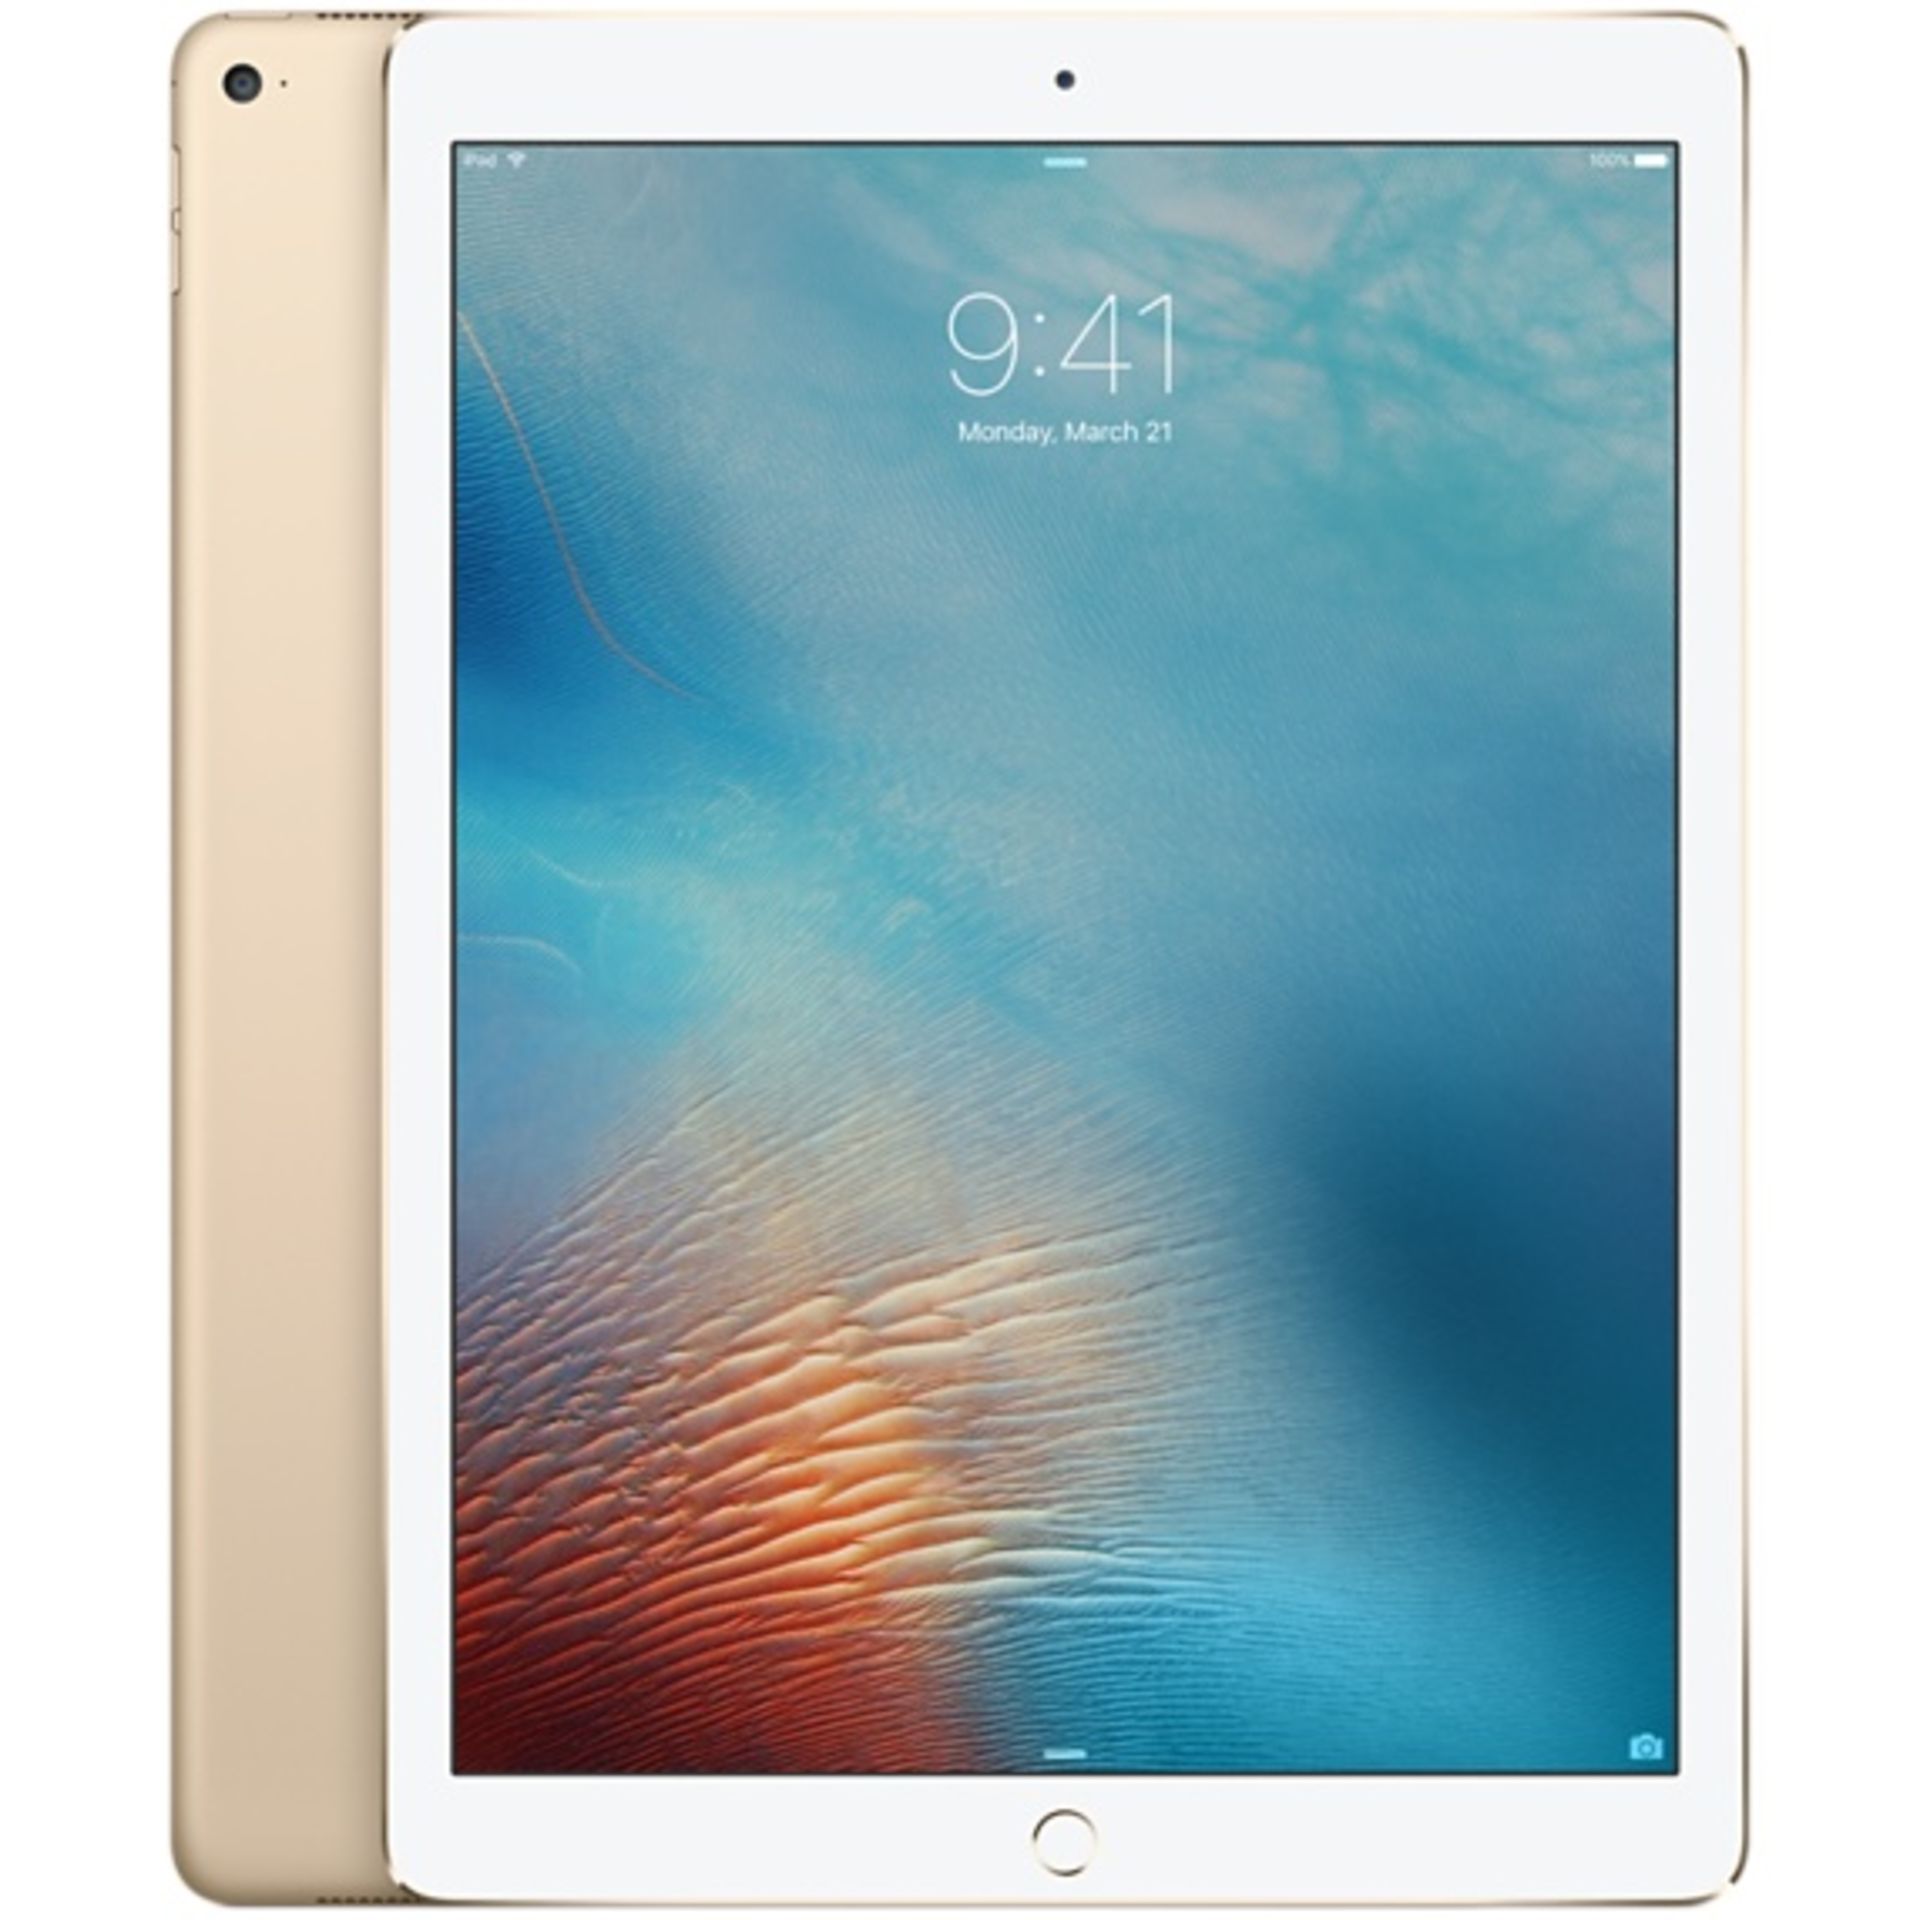 V Grade A Apple iPad Pro 12.9" Gold 32GB - Wi-Fi Only - with accessories and original box